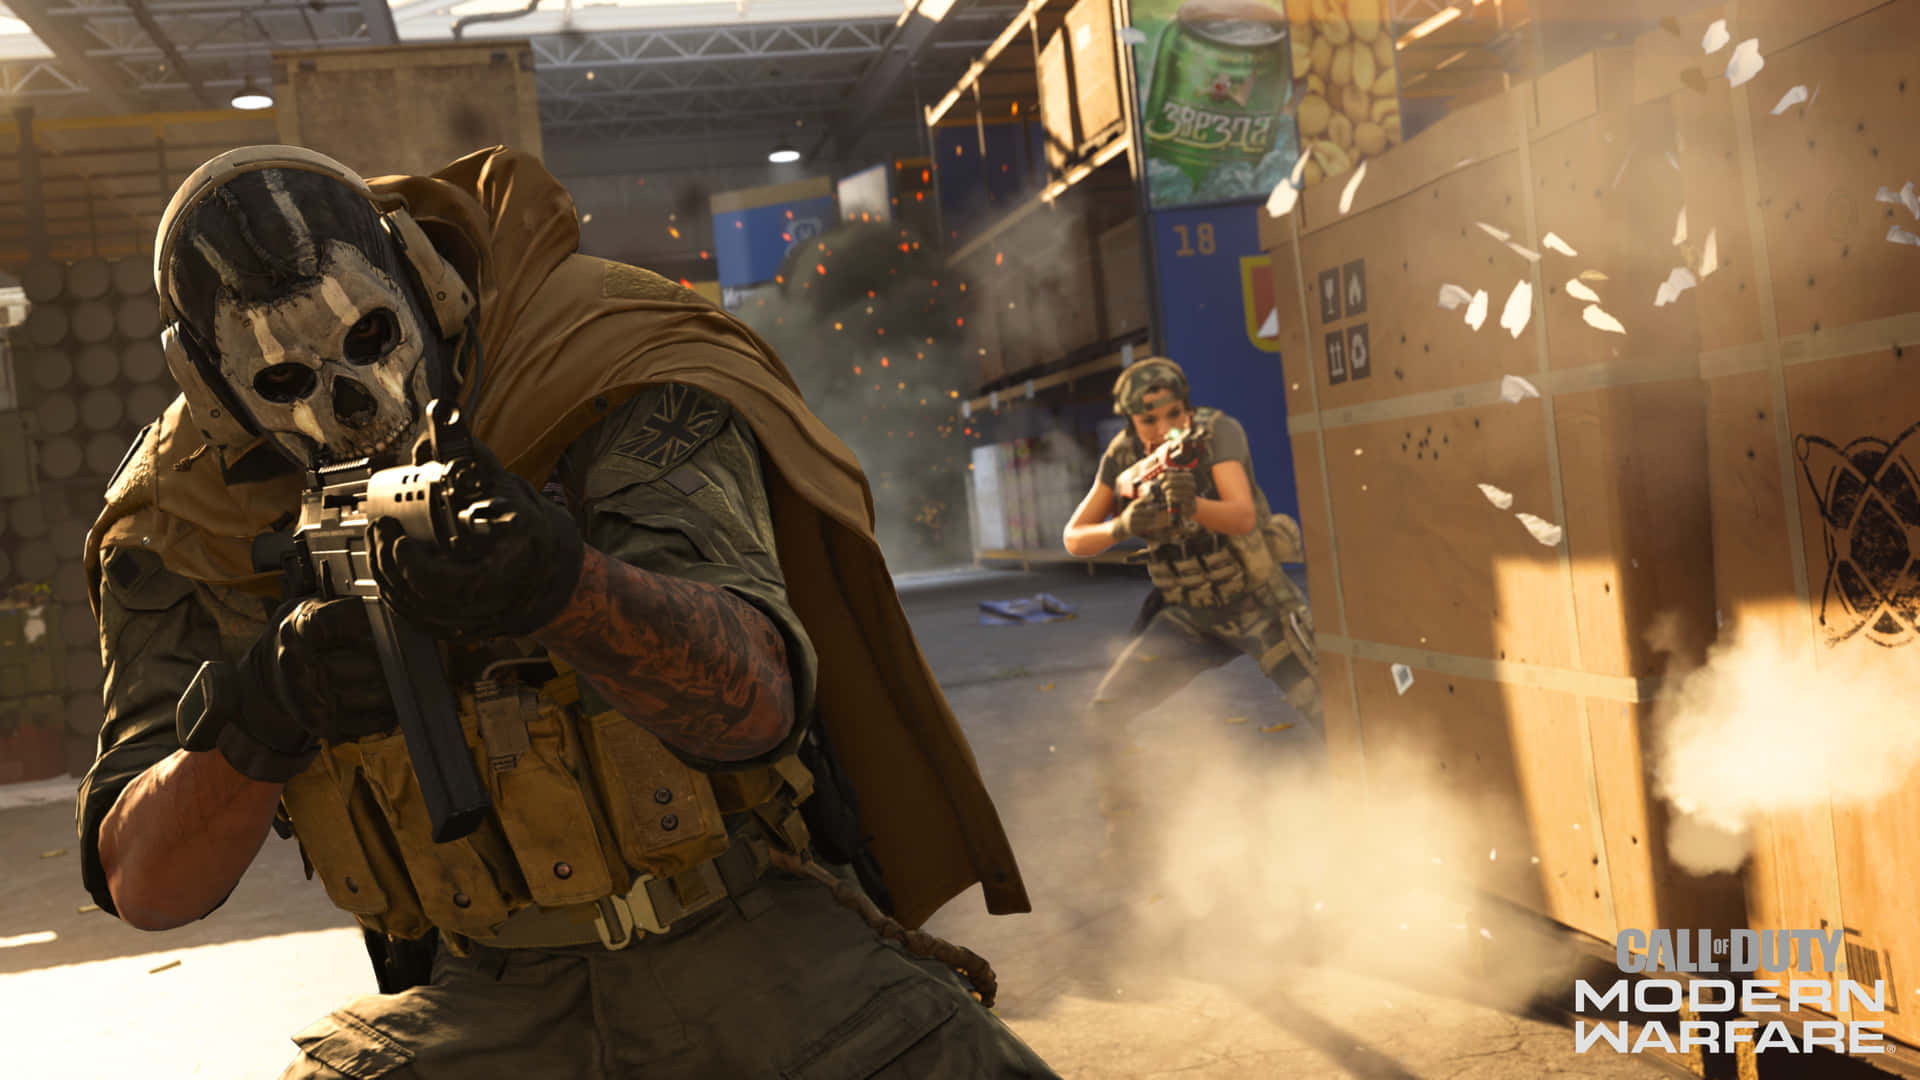 Experience the thrill of intense combat in Call of Duty: Modern Warfare